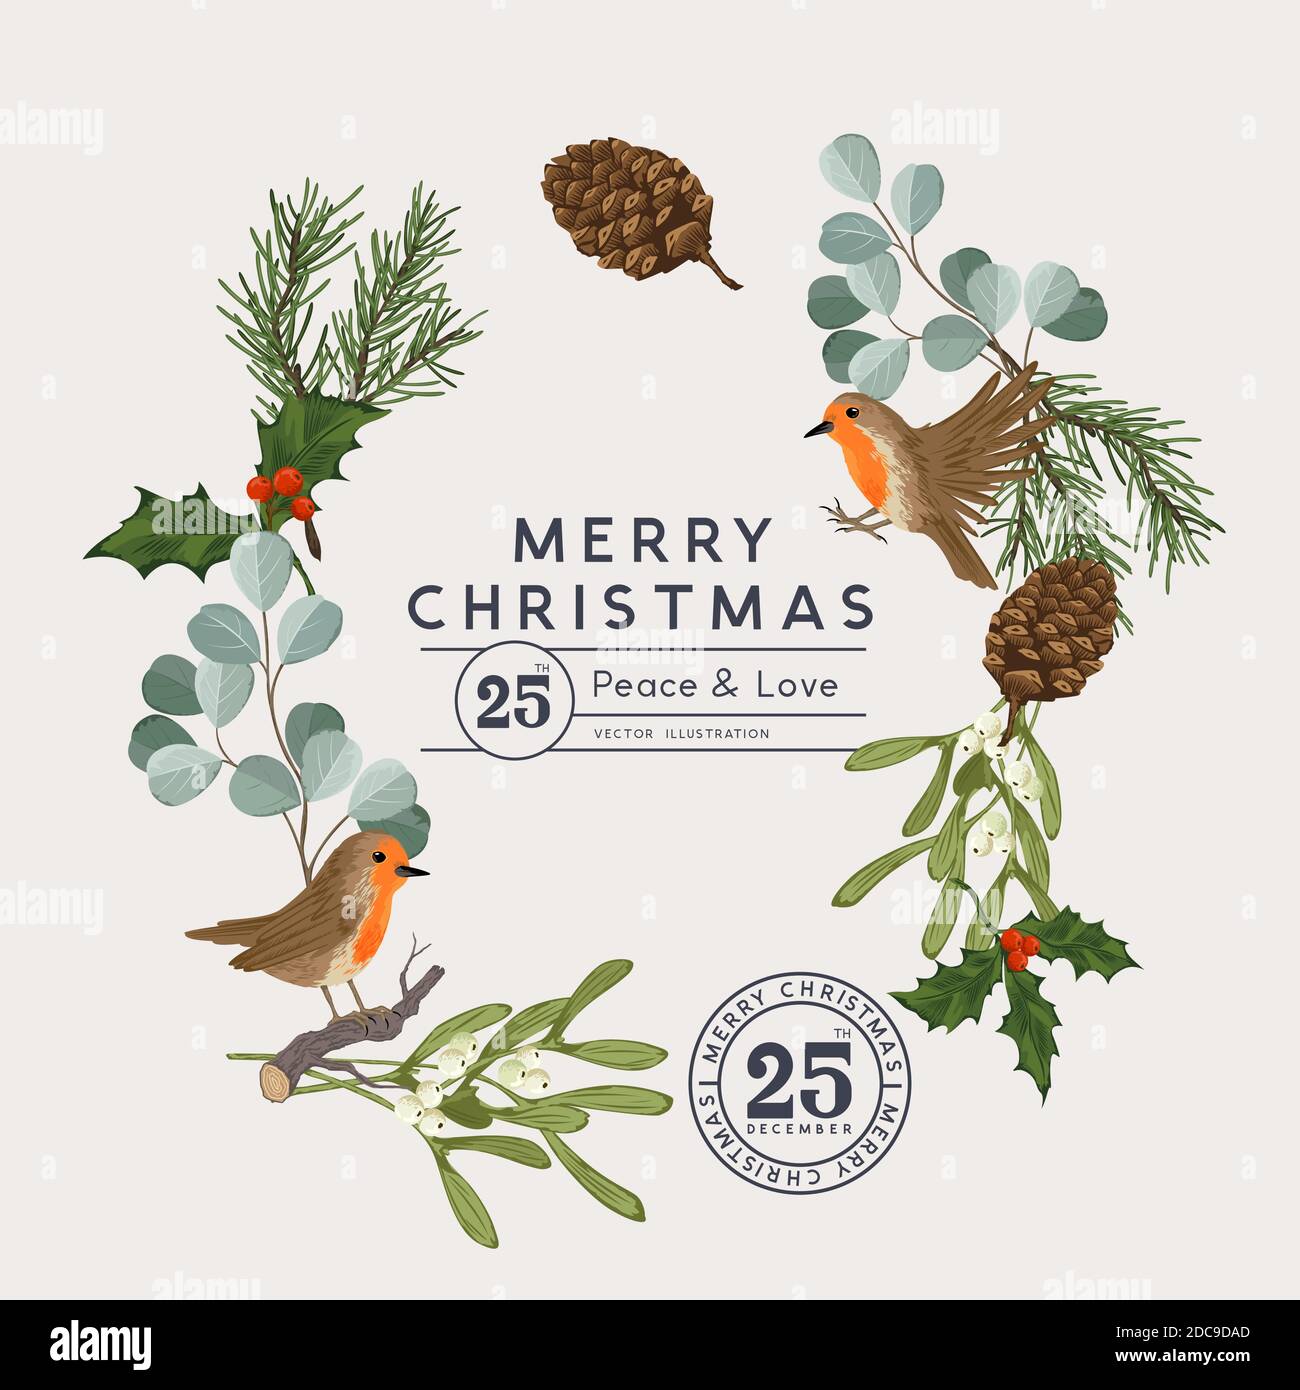 A vintage christmas natural illustration frame wreath with winter Robin birds and botanical floral plants, holly pines, mistletoe and eucalyptus leave Stock Vector